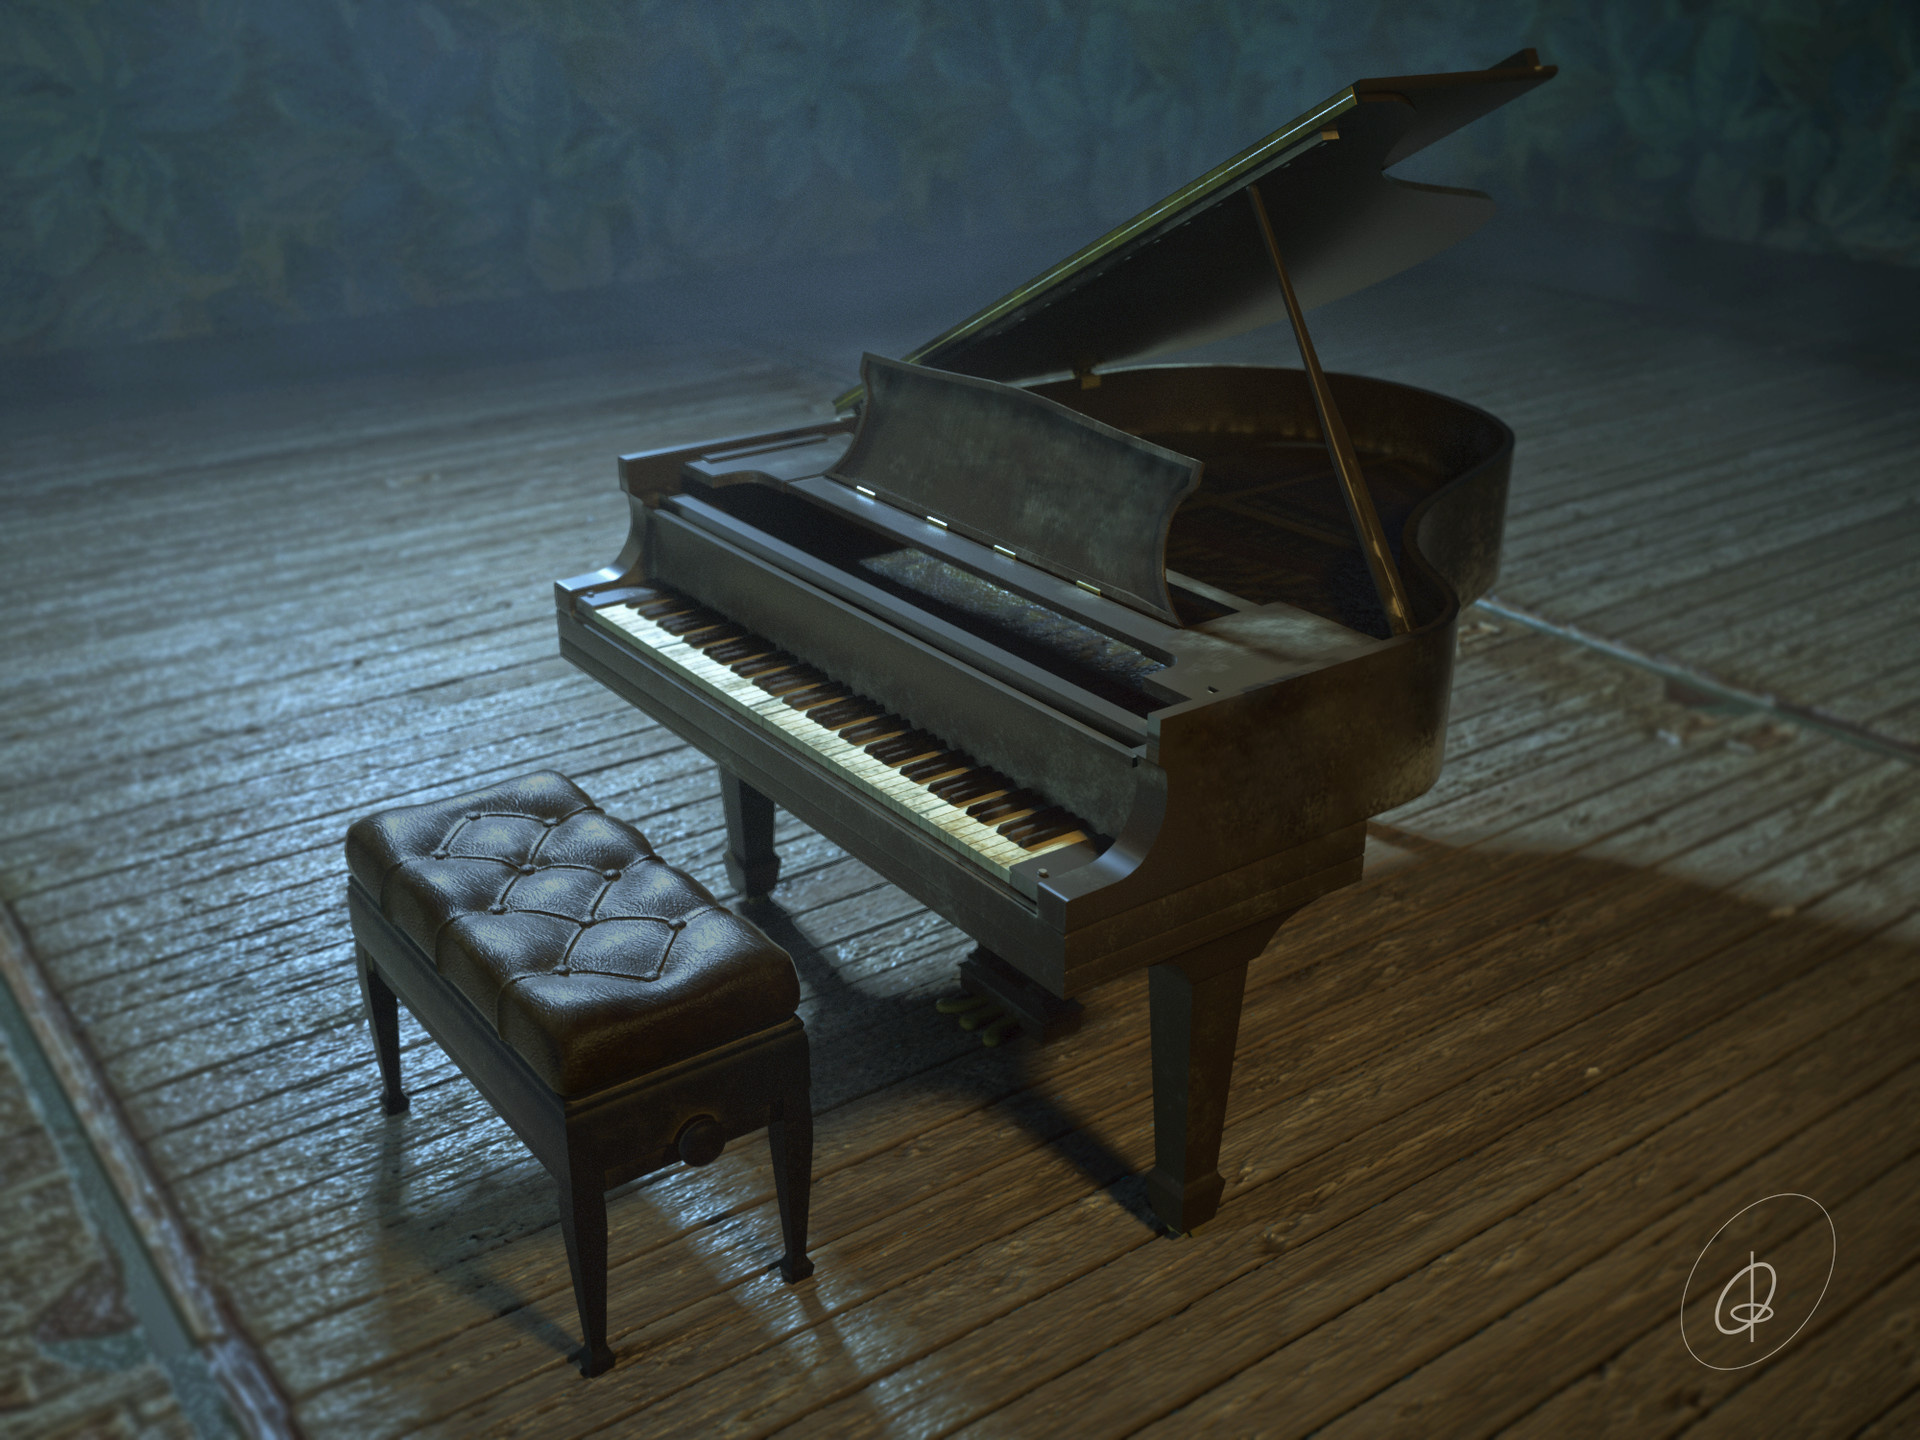 Grand Piano: A large musical instrument with a row of black and white keys that are pressed to play notes, Cg model. 1920x1440 HD Wallpaper.